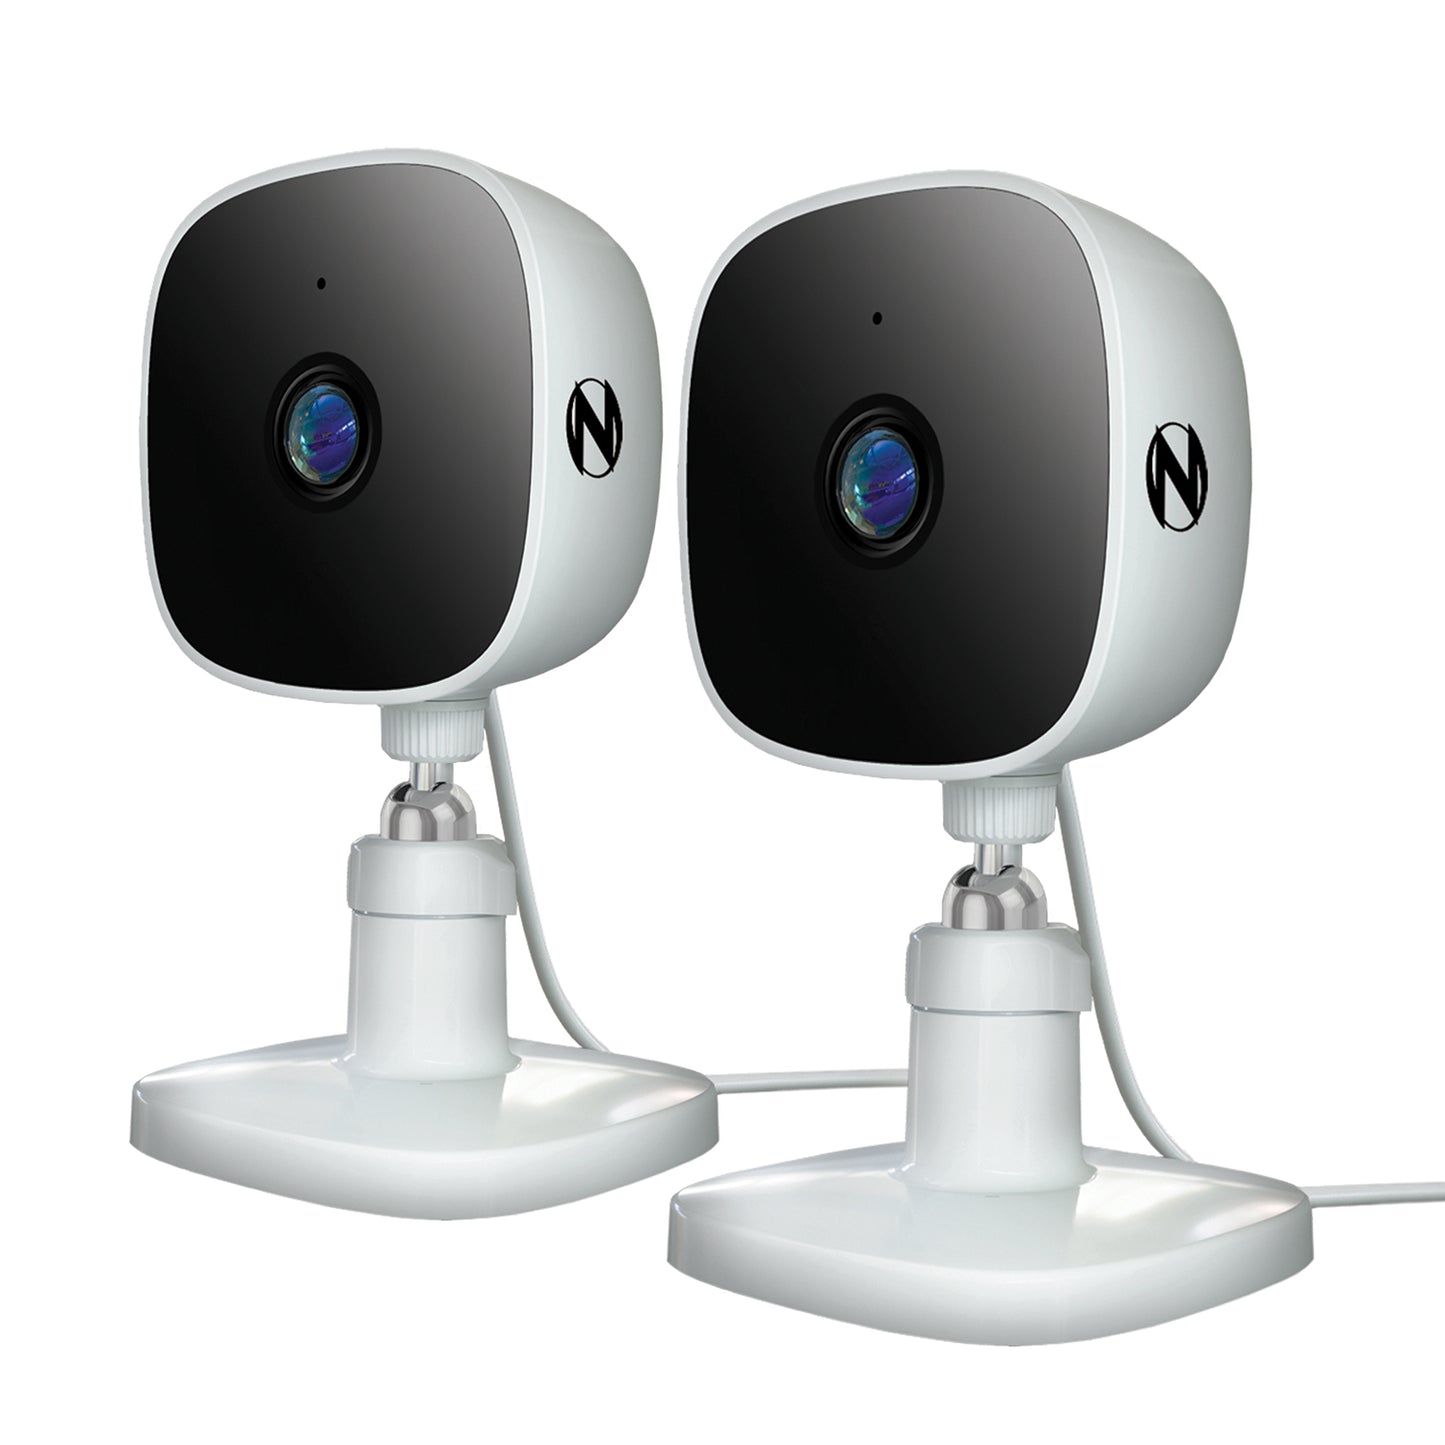 Indoor Wi-Fi IP Plug In 1080p Deterrence Camera with 2-Way Audio - 2PK - White